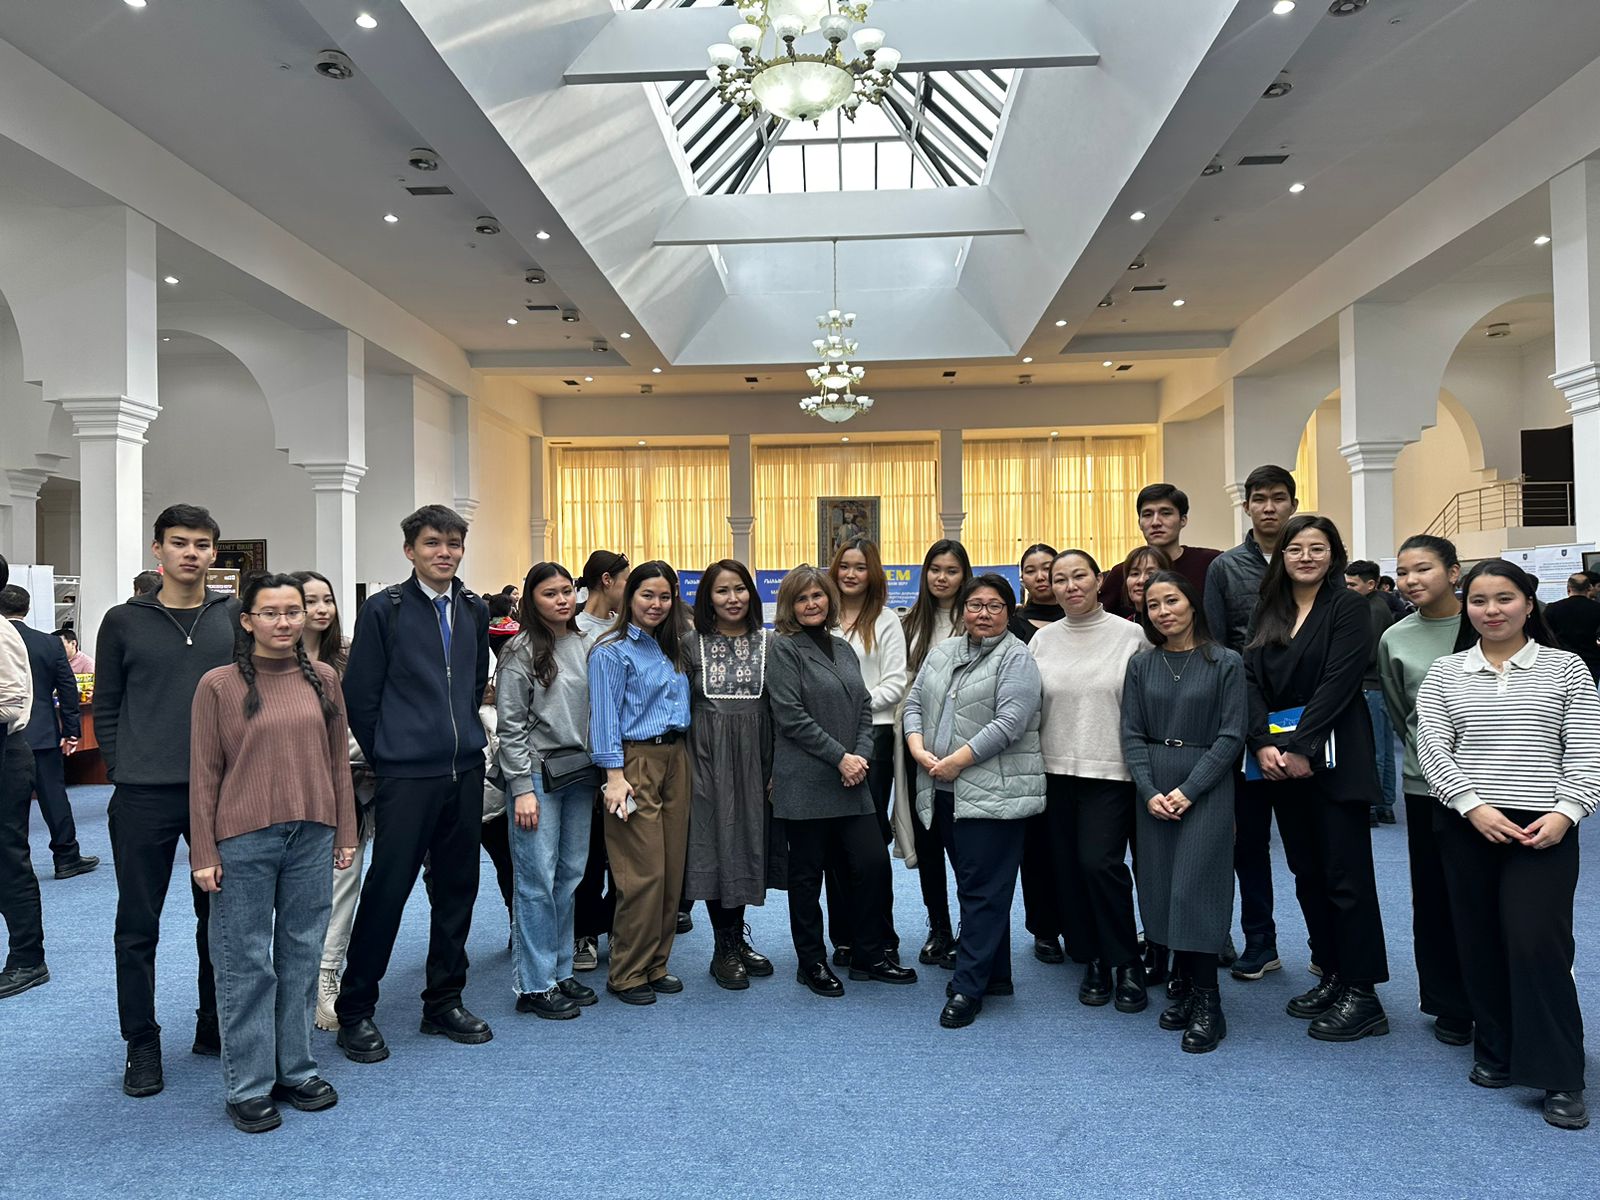 FACULTY STUDENTS TOOK PART IN THE JOB FAIR